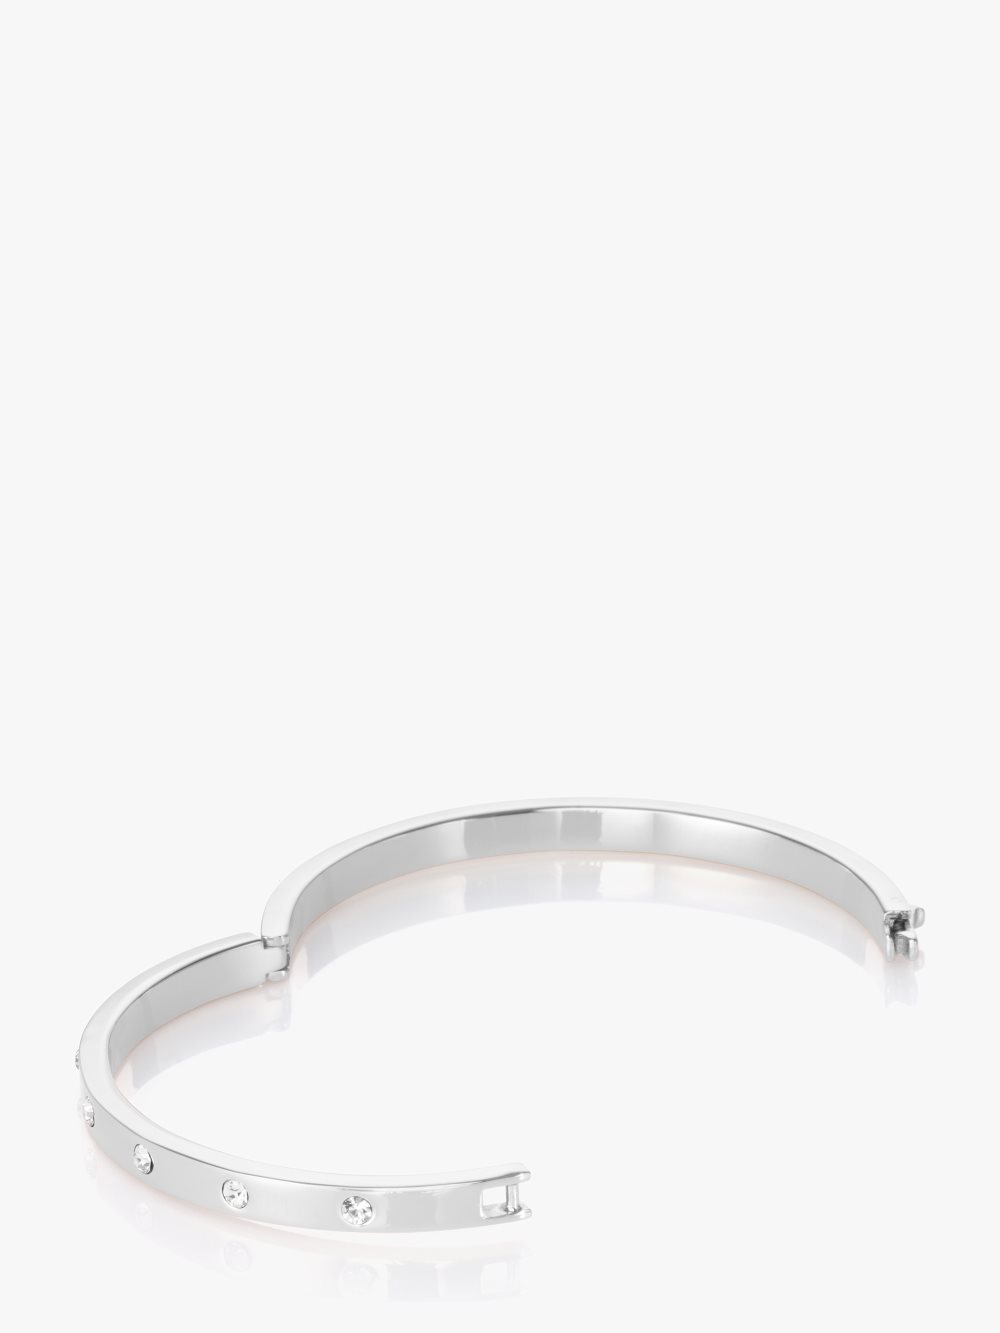 Women's clear/silver set in stone stone hinged bangle | Kate Spade